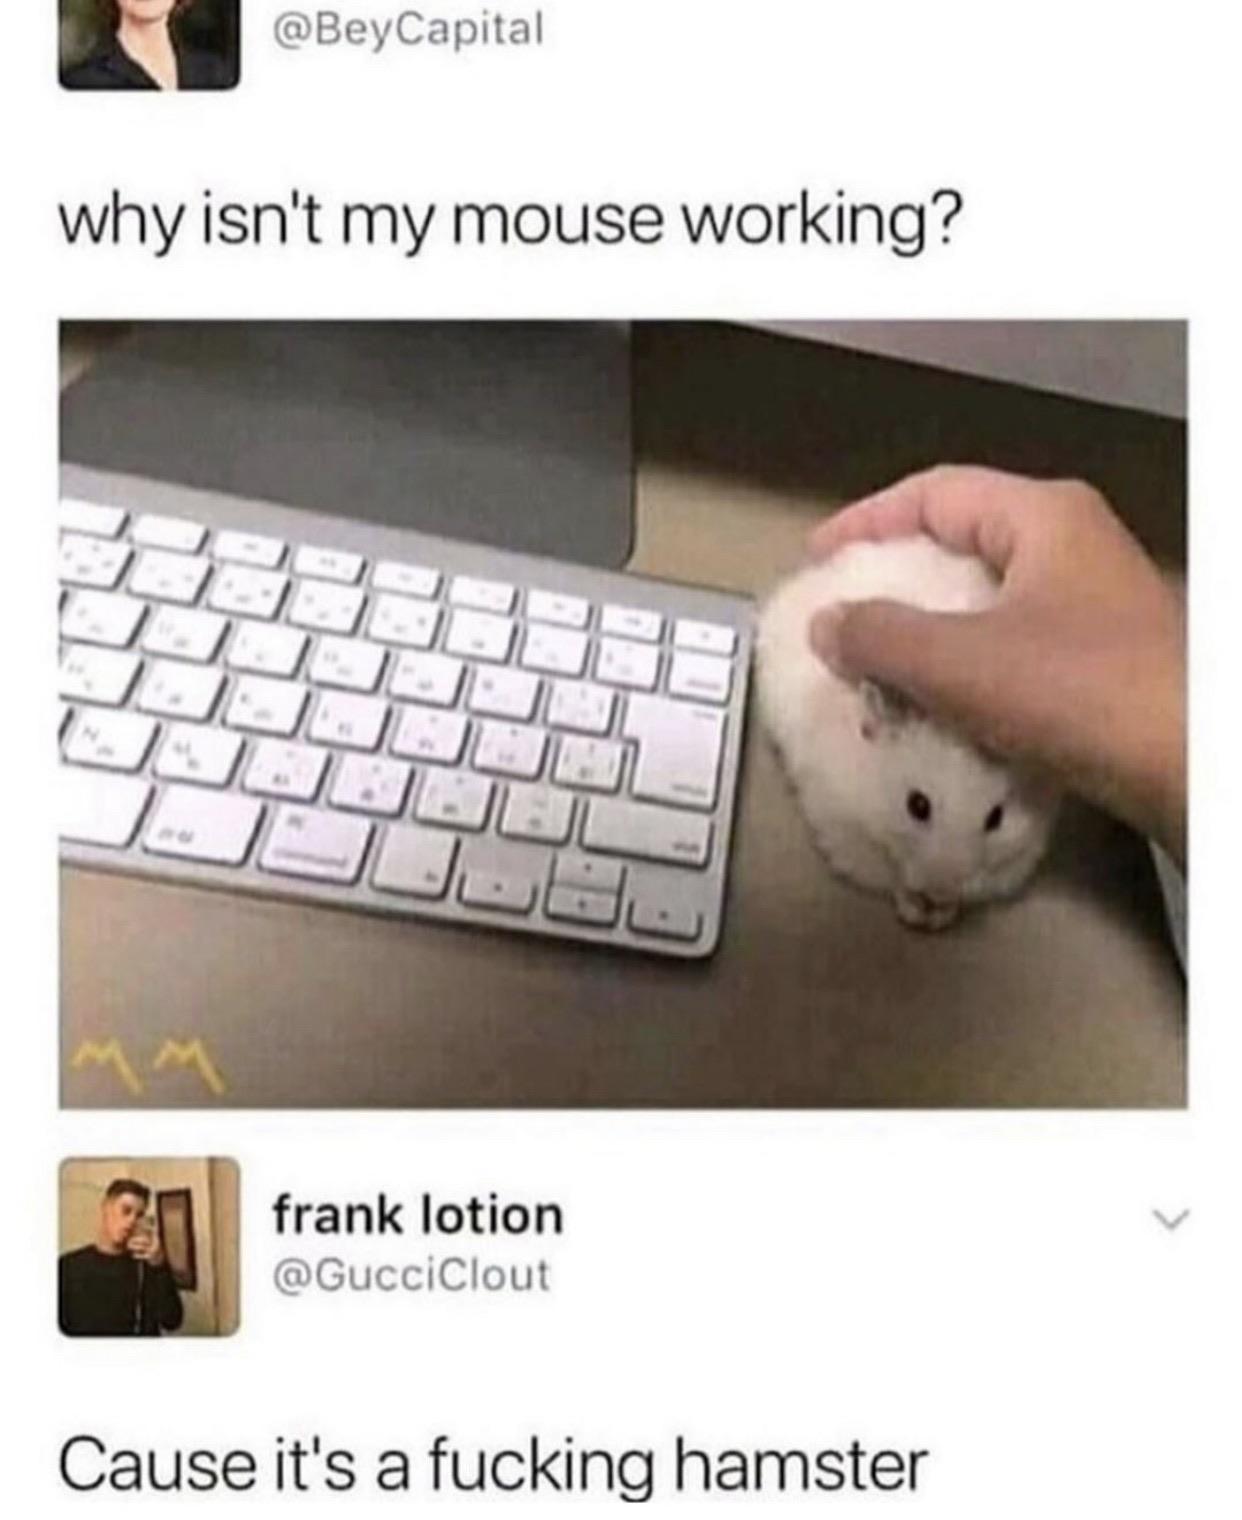 isn t my mouse working - Capital why isn't my mouse working? frank lotion Cause it's a fucking hamster